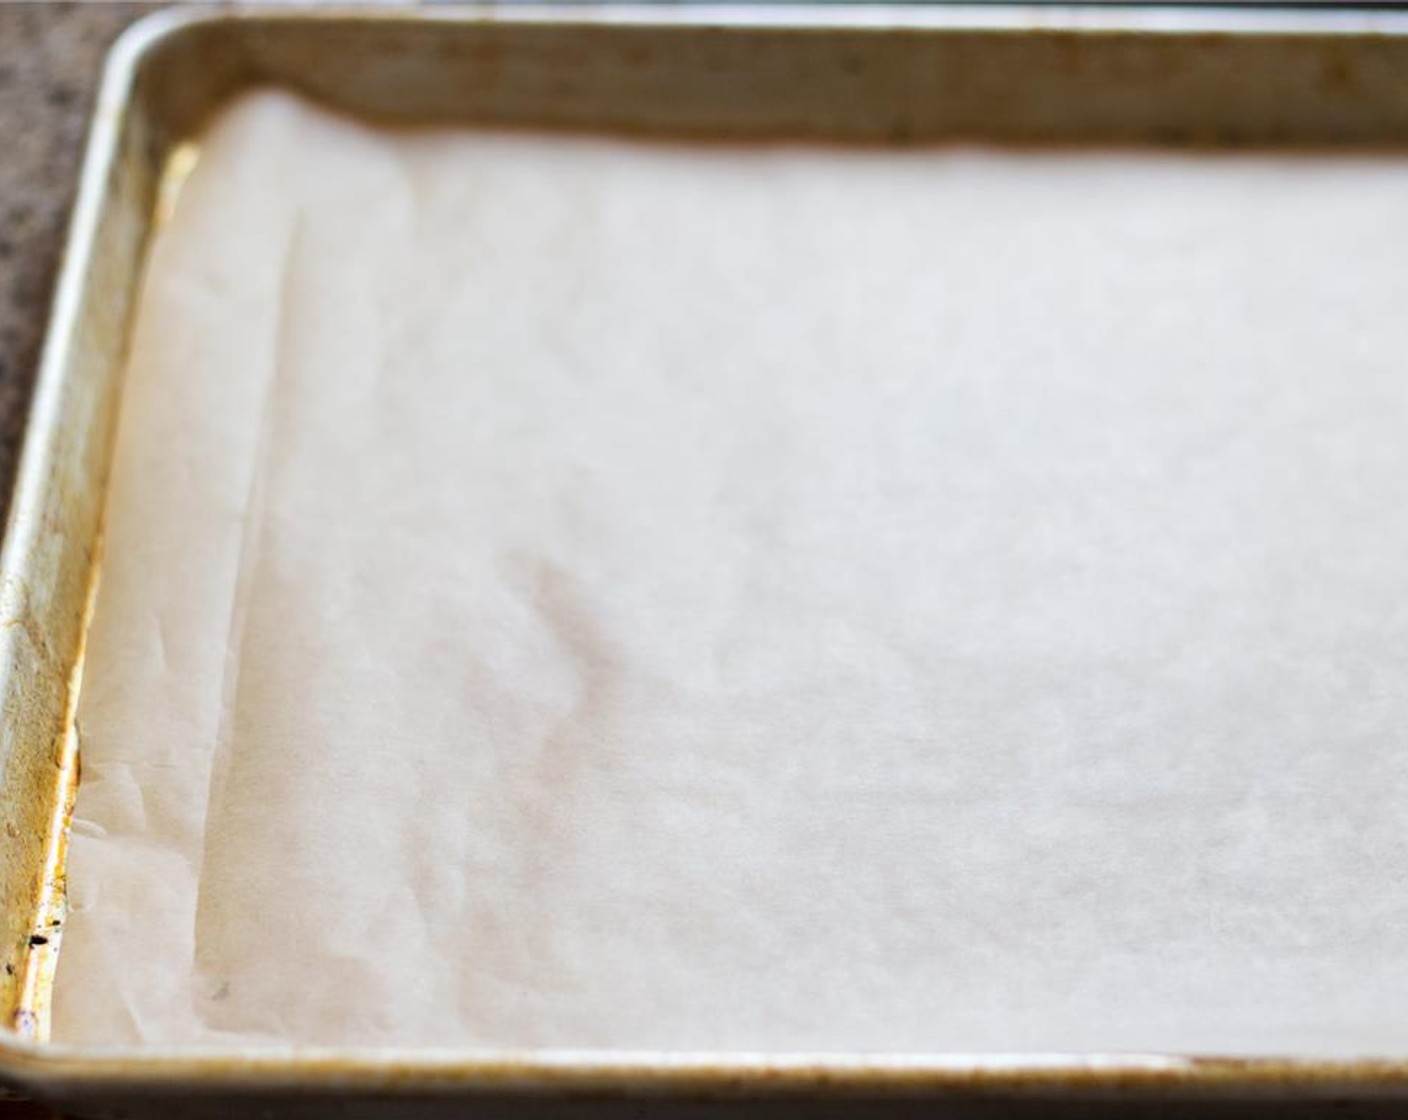 step 2 Turn the oven to 400 degrees F (200 degrees C). Line a baking sheet with parchment paper, or lightly grease the pan if you don't have the paper.